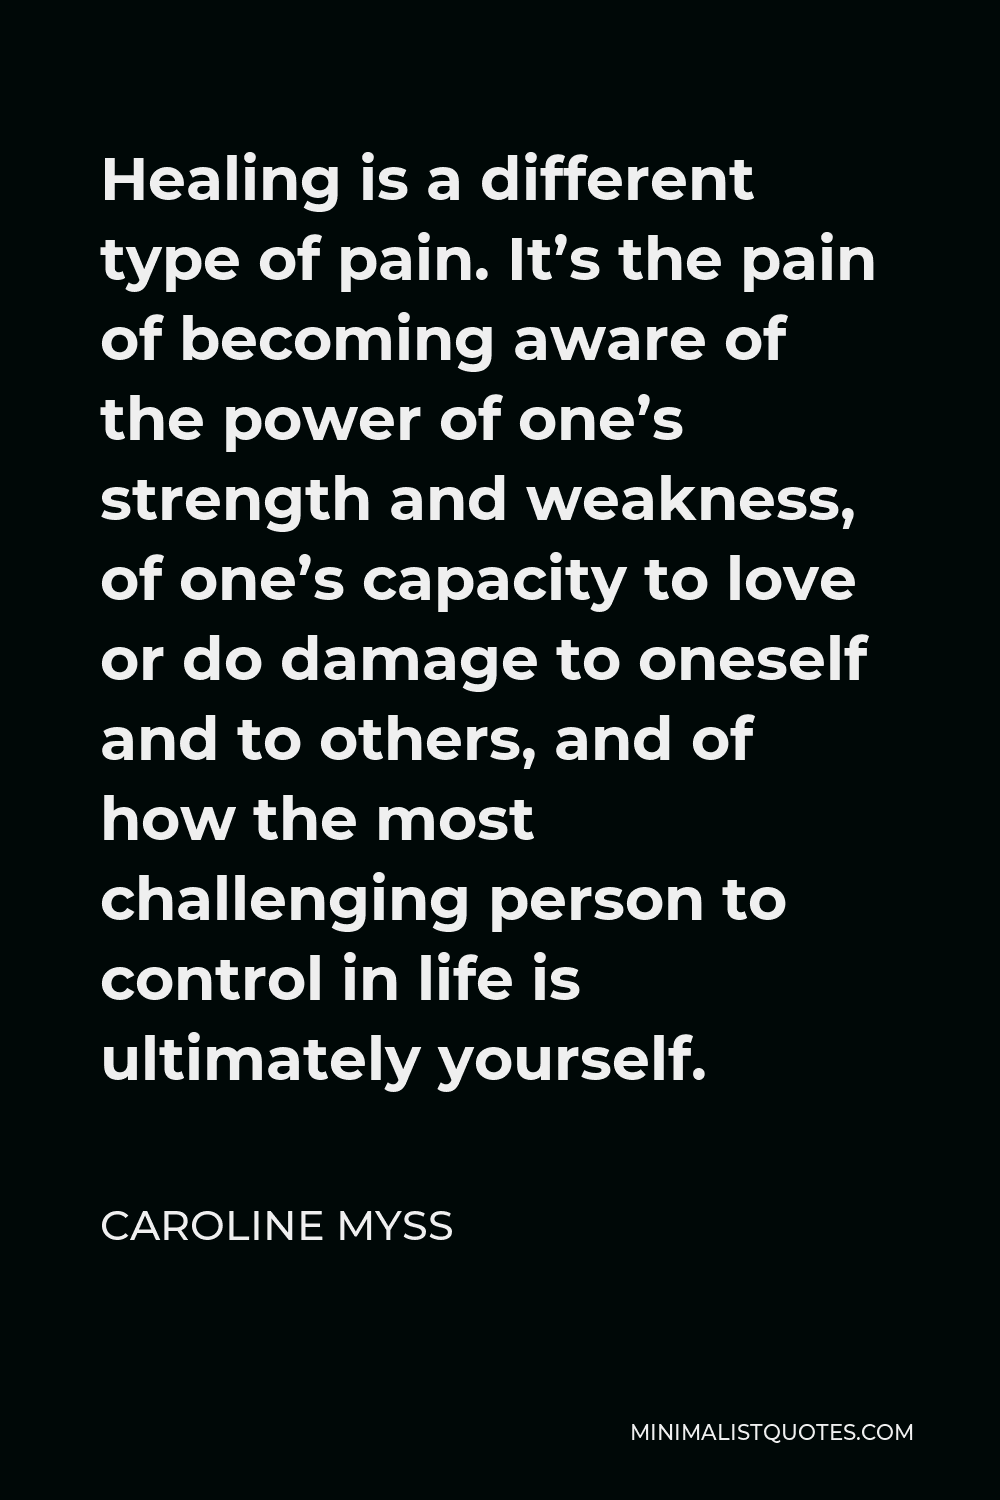 Caroline Myss Quote - Healing is a different type of pain. It’s the pain of becoming aware of the power of one’s strength and weakness, of one’s capacity to love or do damage to oneself and to others, and of how the most challenging person to control in life is ultimately yourself.